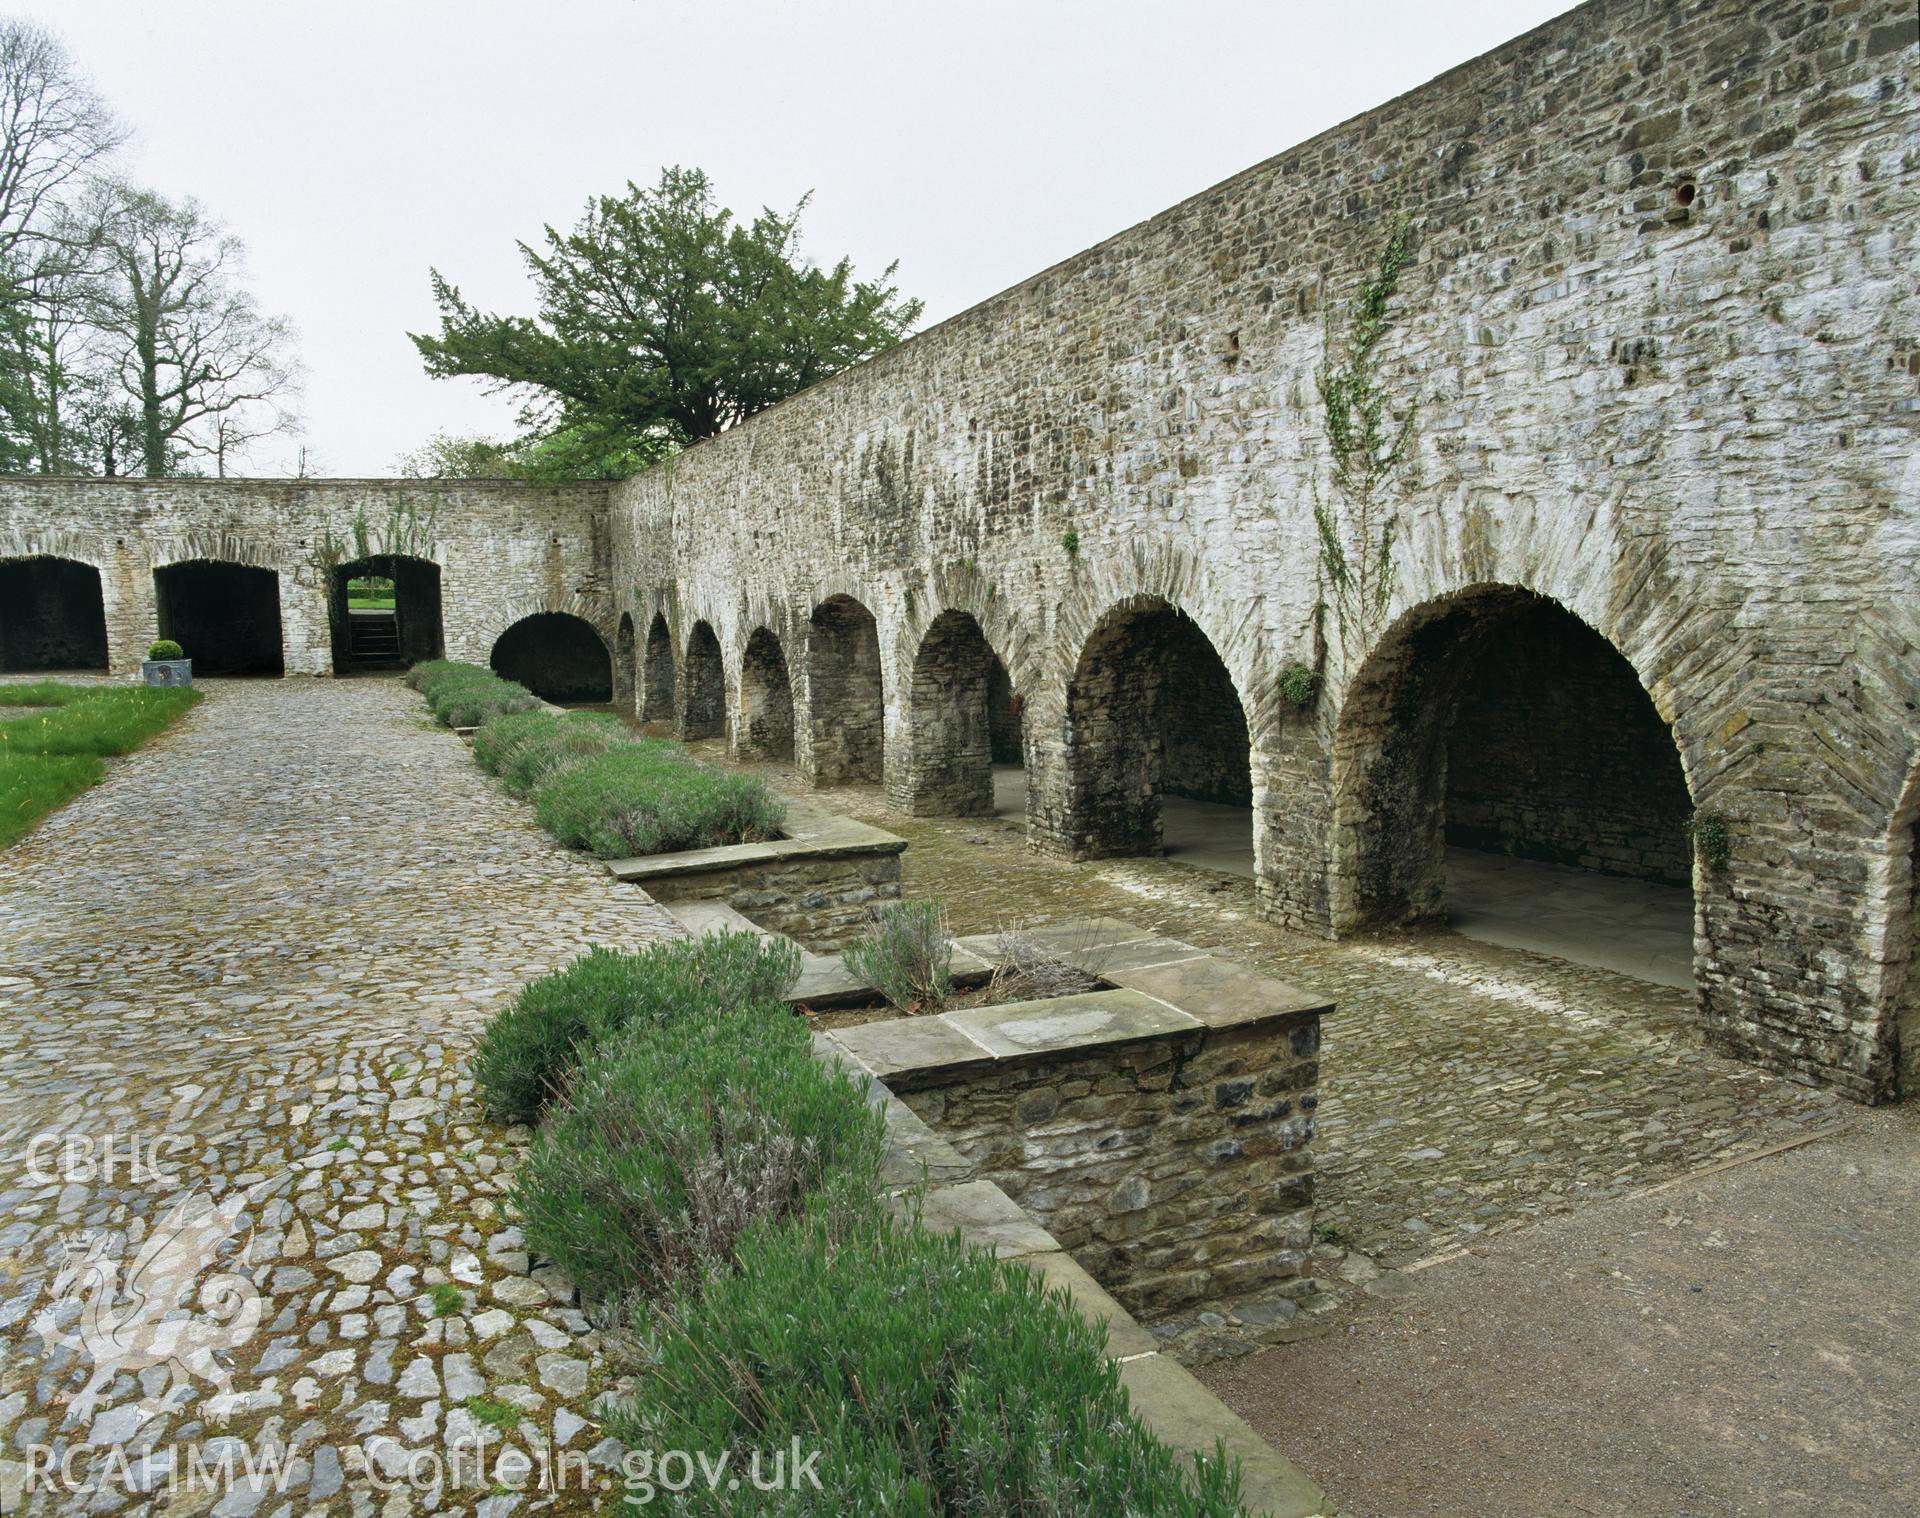 Colour transparency showing the cloister wall at Aberglasney, Llansgathen, produced by Iain Wright, June 2004.